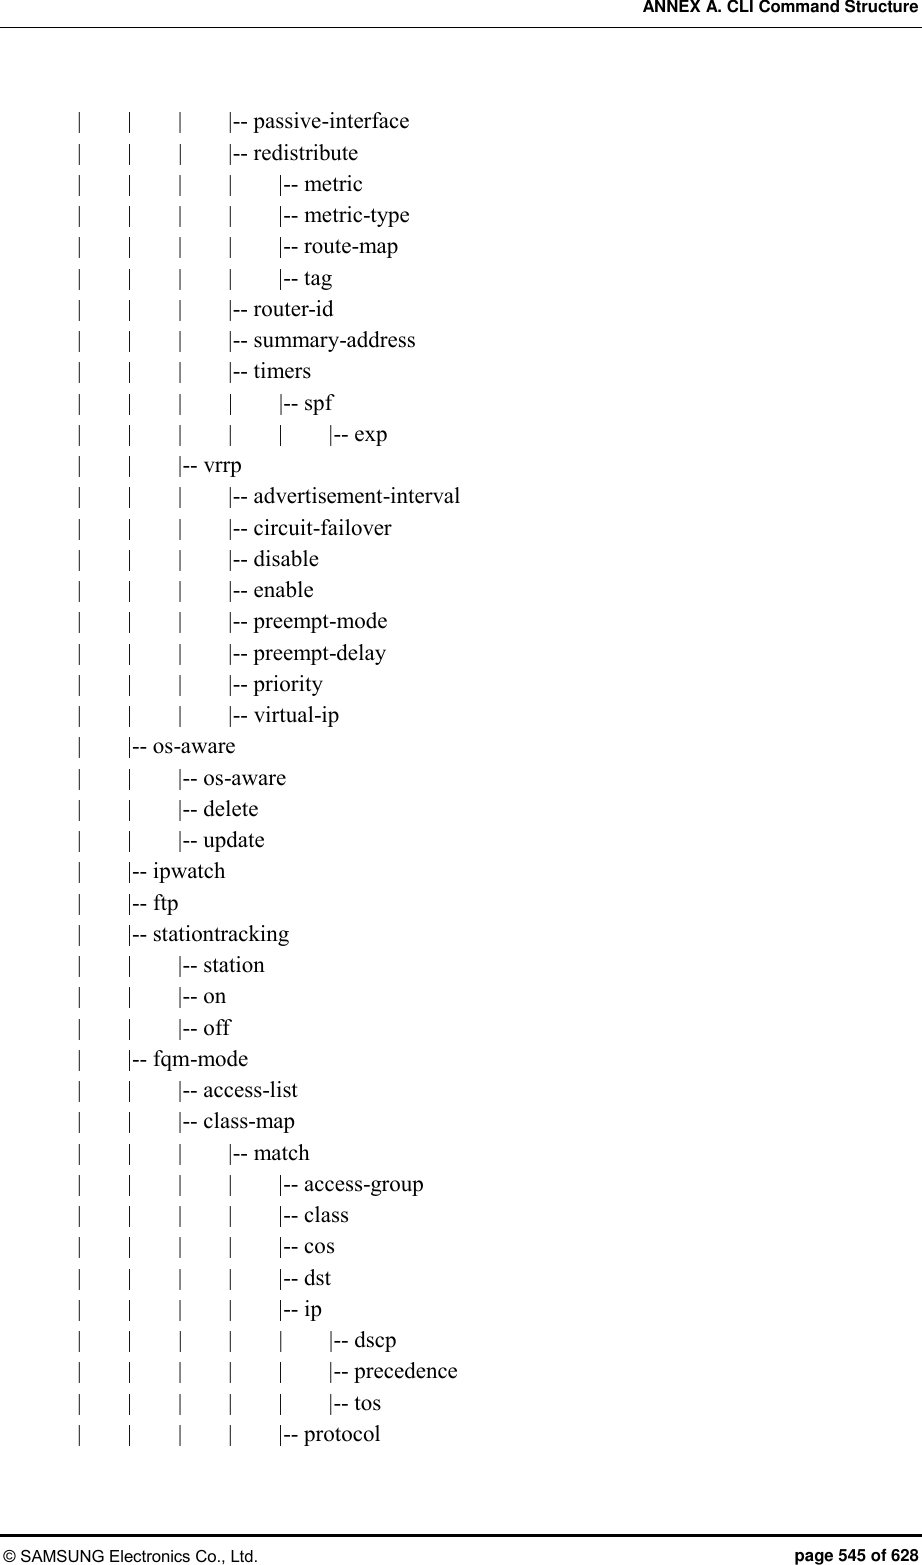 ANNEX A. CLI Command Structure © SAMSUNG Electronics Co., Ltd.  page 545 of 628 |        |        |        |-- passive-interface |        |      |        |-- redistribute |        |        |        |        |-- metric |        |        |        |        |-- metric-type |        |        |        |        |-- route-map |        |        |        |        |-- tag |        |        |        |-- router-id |        |        |        |-- summary-address |        |        |        |-- timers |        |        |      |        |-- spf |        |        |        |        |        |-- exp |        |        |-- vrrp |        |        |        |-- advertisement-interval |        |        |        |-- circuit-failover |        |        |        |-- disable |        |        |        |-- enable |        |        |        |-- preempt-mode |        |        |        |-- preempt-delay |        |        |        |-- priority |        |        |        |-- virtual-ip |        |-- os-aware |        |        |-- os-aware |        |        |-- delete |        |        |-- update |        |-- ipwatch |        |-- ftp |        |-- stationtracking |        |        |-- station |        |        |-- on |        |        |-- off |        |-- fqm-mode |        |        |-- access-list |        |        |-- class-map |        |        |        |-- match |        |        |        |        |-- access-group |        |        |        |        |-- class |        |        |        |        |-- cos |        |        |        |        |-- dst |        |        |        |        |-- ip |        |        |        |        |        |-- dscp |        |        |        |        |        |-- precedence |        |        |        |        |        |-- tos |        |        |        |        |-- protocol 